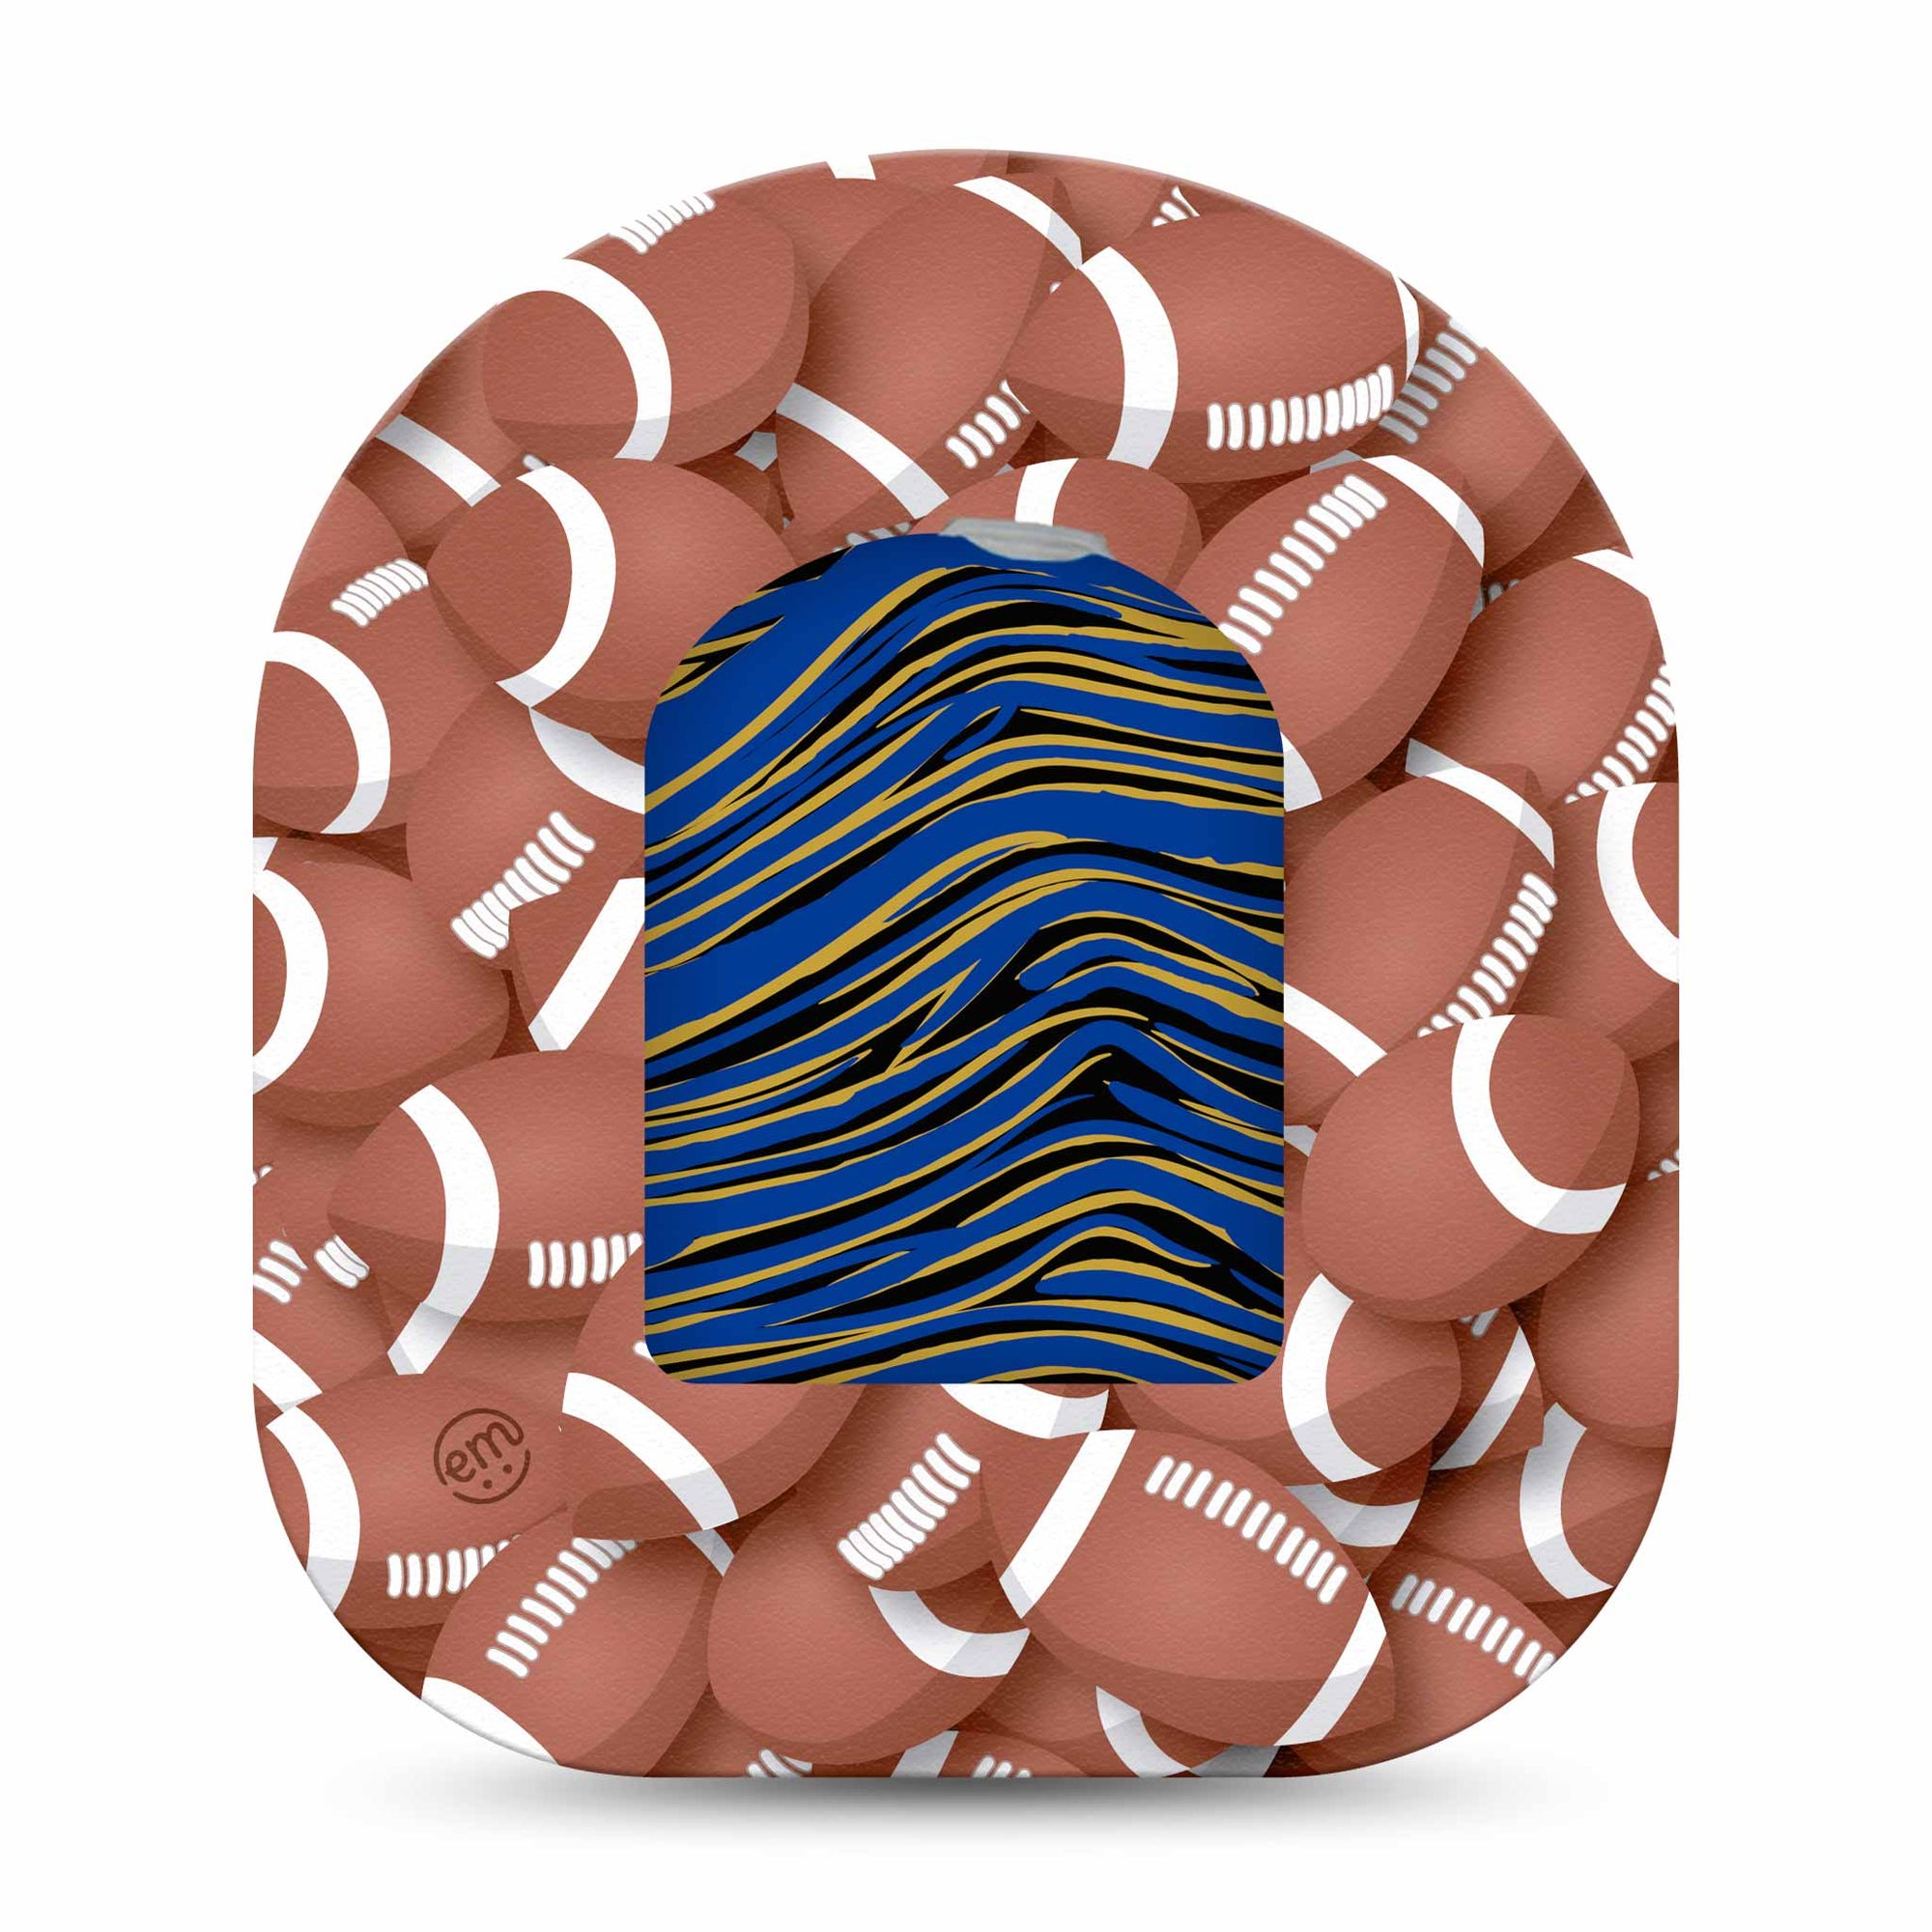 ExpressionMed Purple, Black, and Gold Ravens Team Spirit Omnipod Sticker and Football Cover